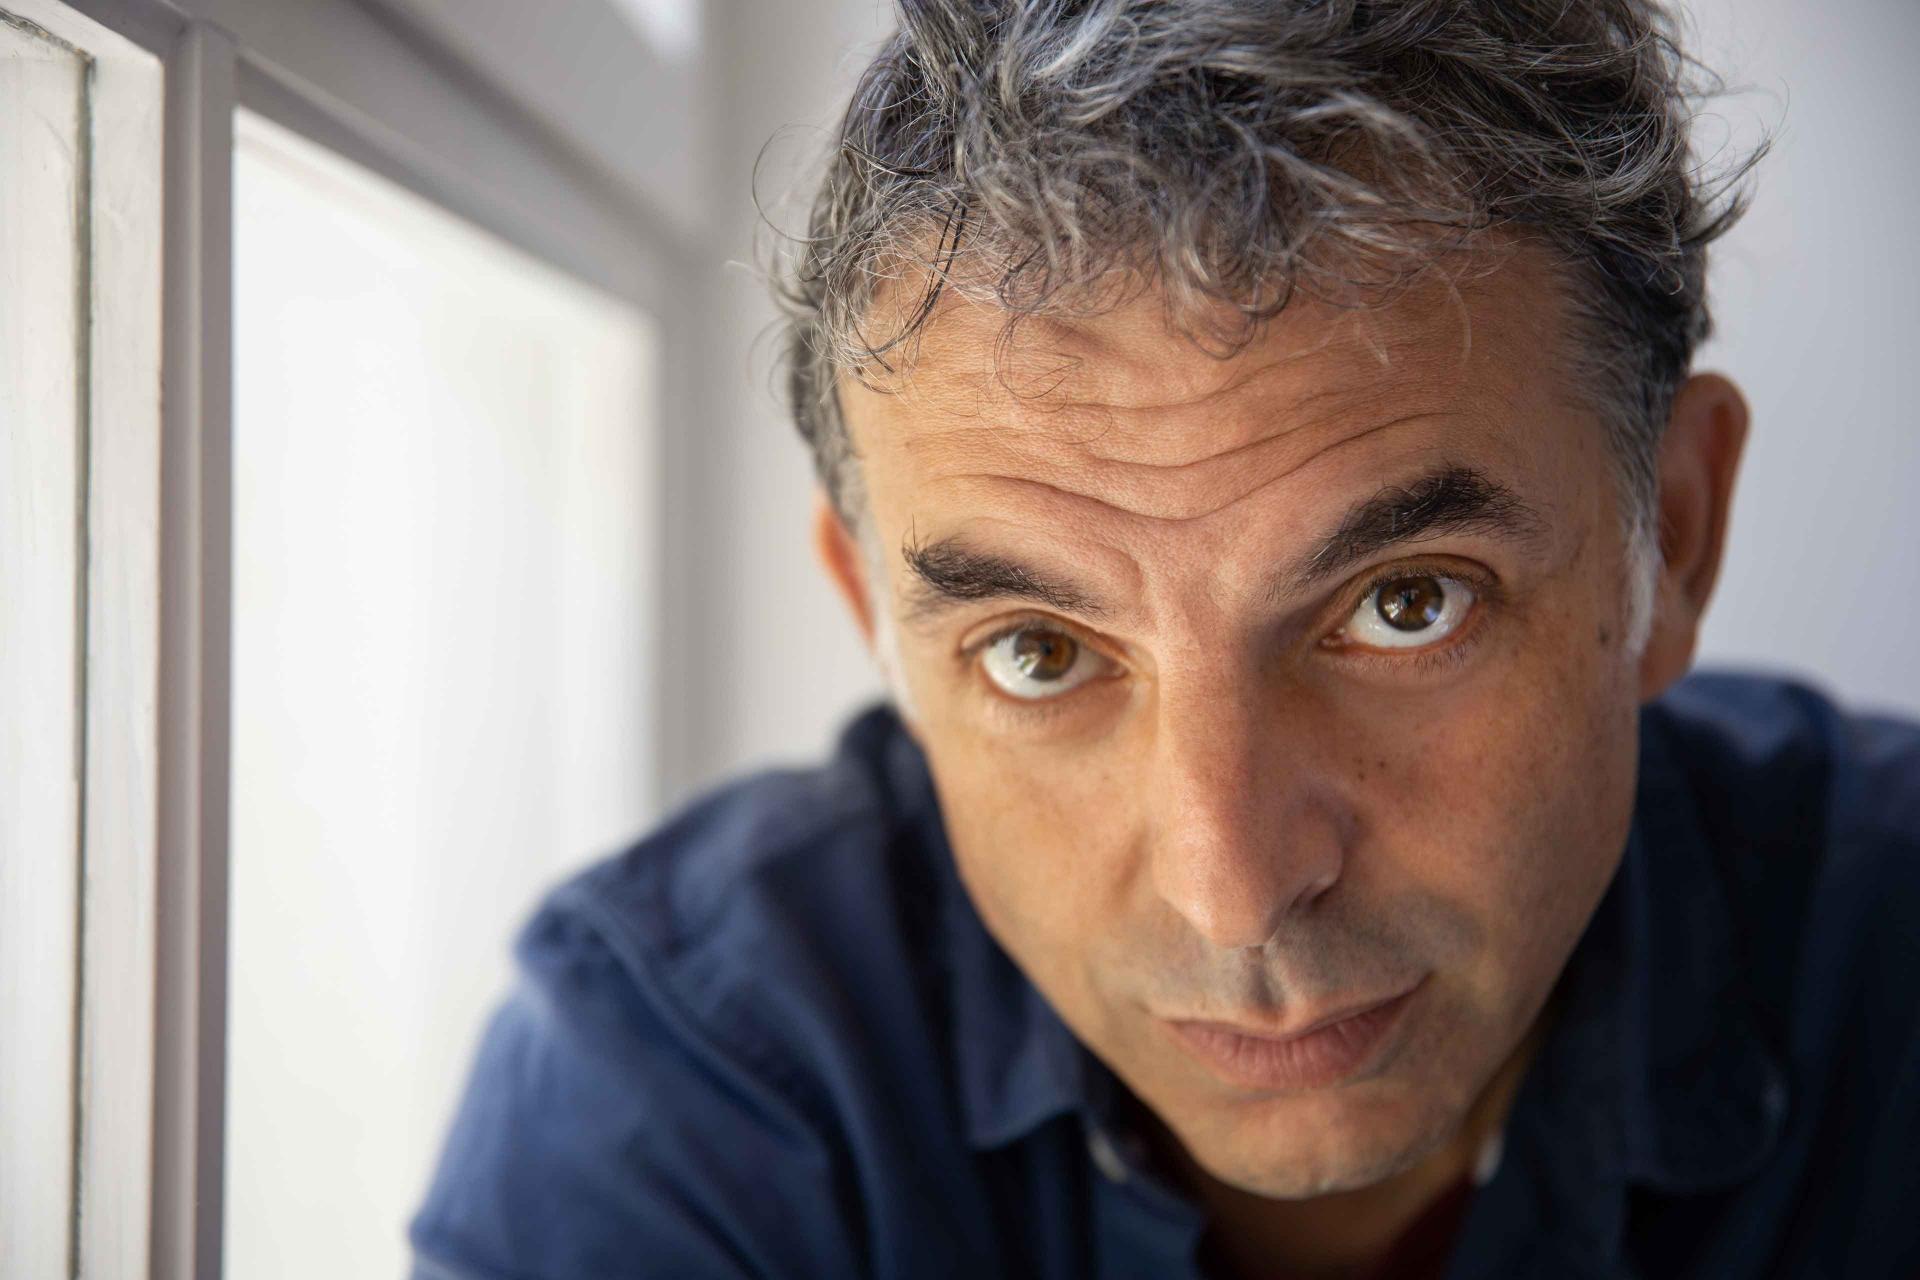 Portrait shot of a middle-aged man (Etgar Keret). His head is tilted slightly downward, he casts an intense gaze from diagonally below into the camera.